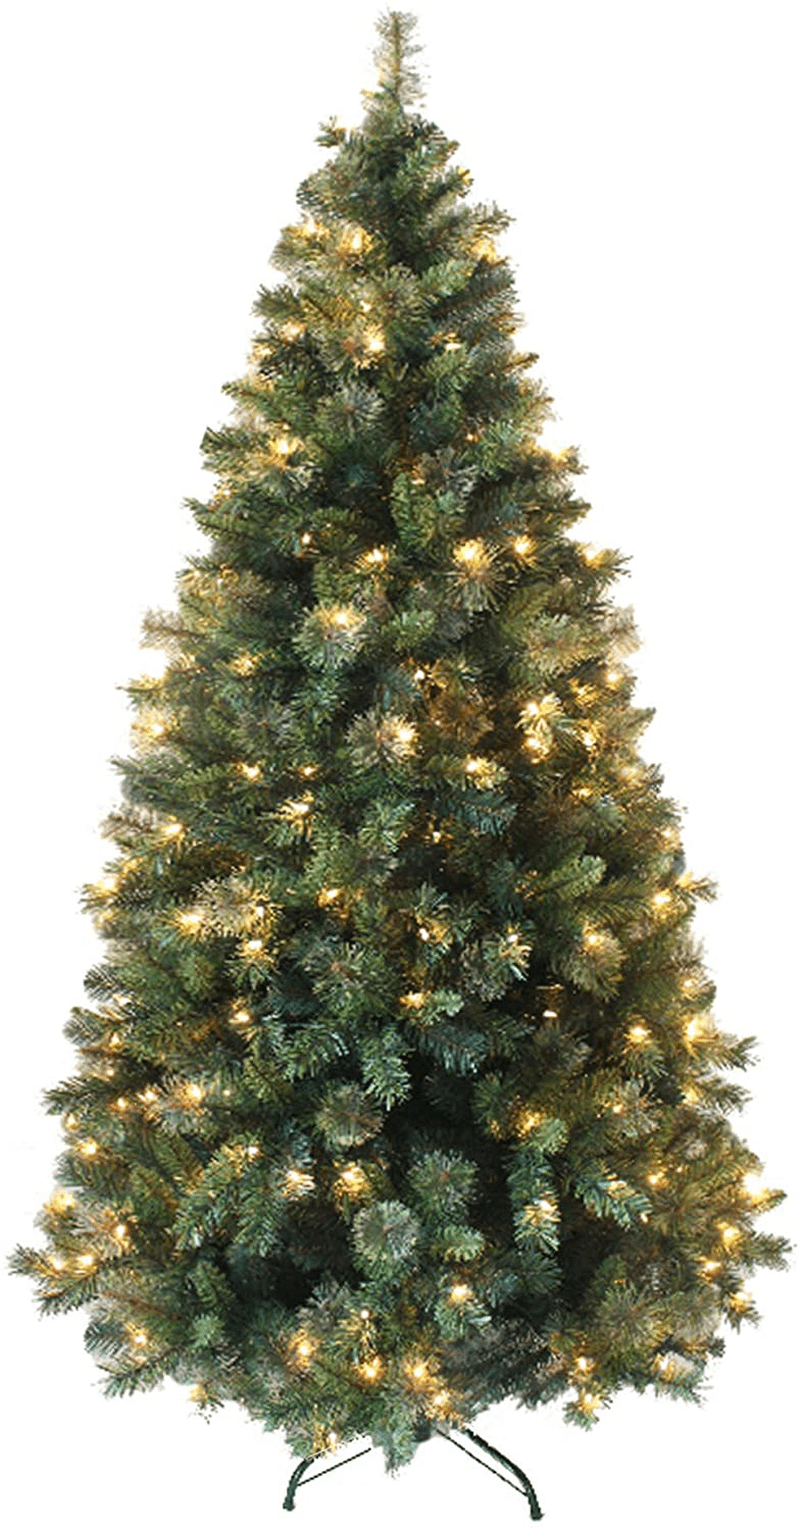 AMERIQUE 691322311464 6 FEET Eight-Function Premium Magnificent Artificial Full Body Shape Christmas Tree with Metal Stand, Hinged Construction, Advanced Realistic Technology, Pre-Lit Green